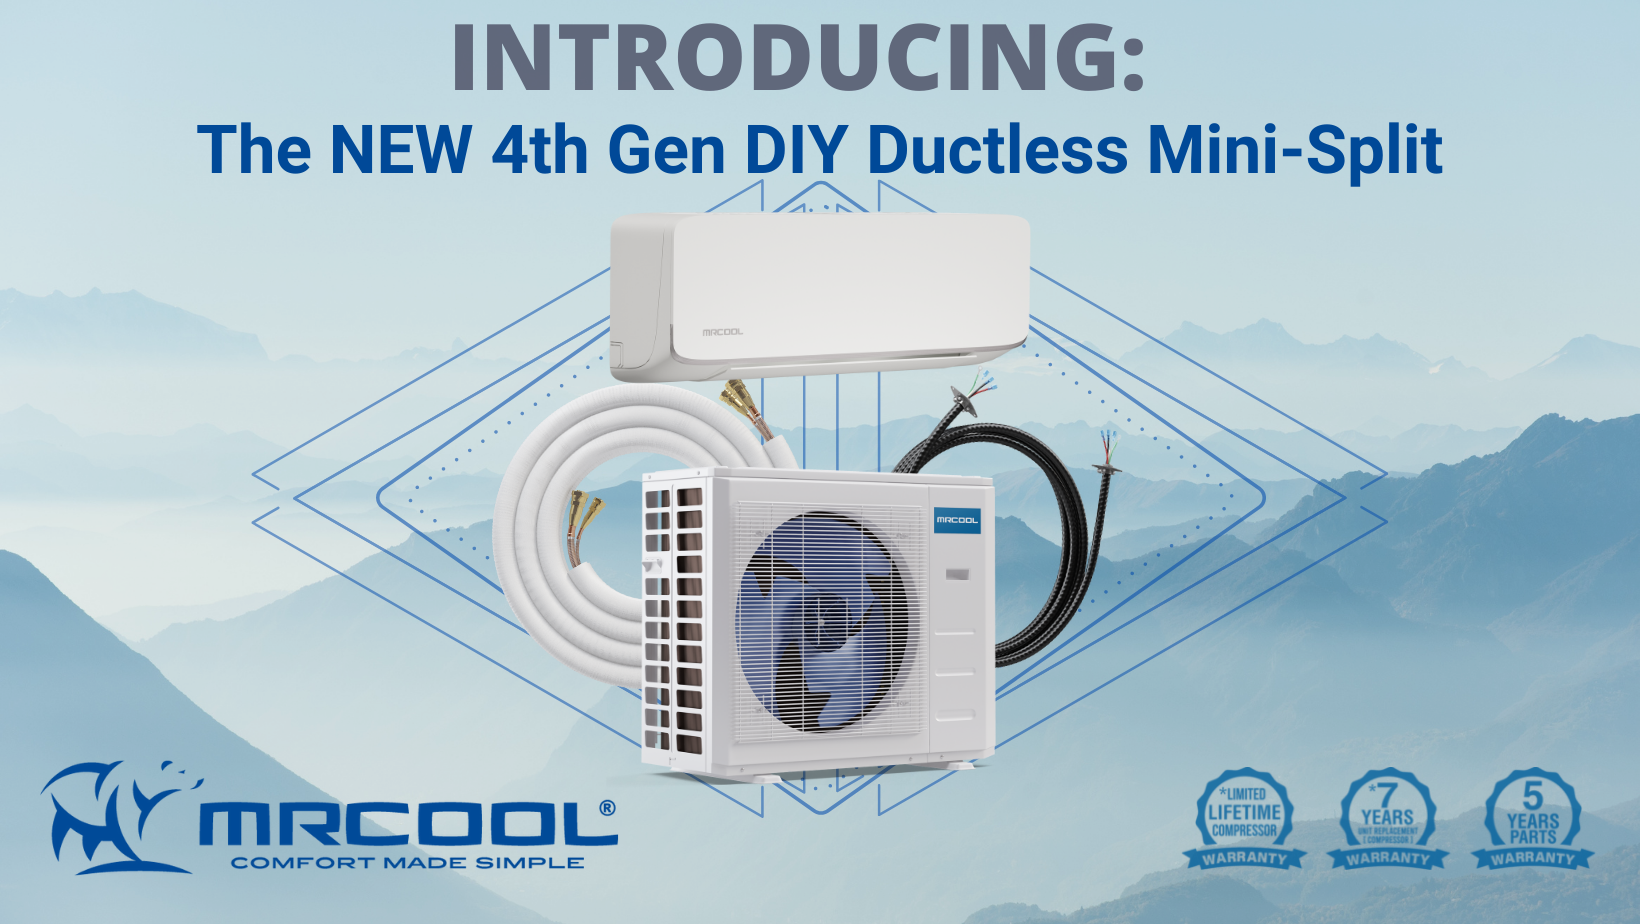 INTRODUCING: The NEW 4th Gen DIY Ductless Mini-Split – MRCOOL